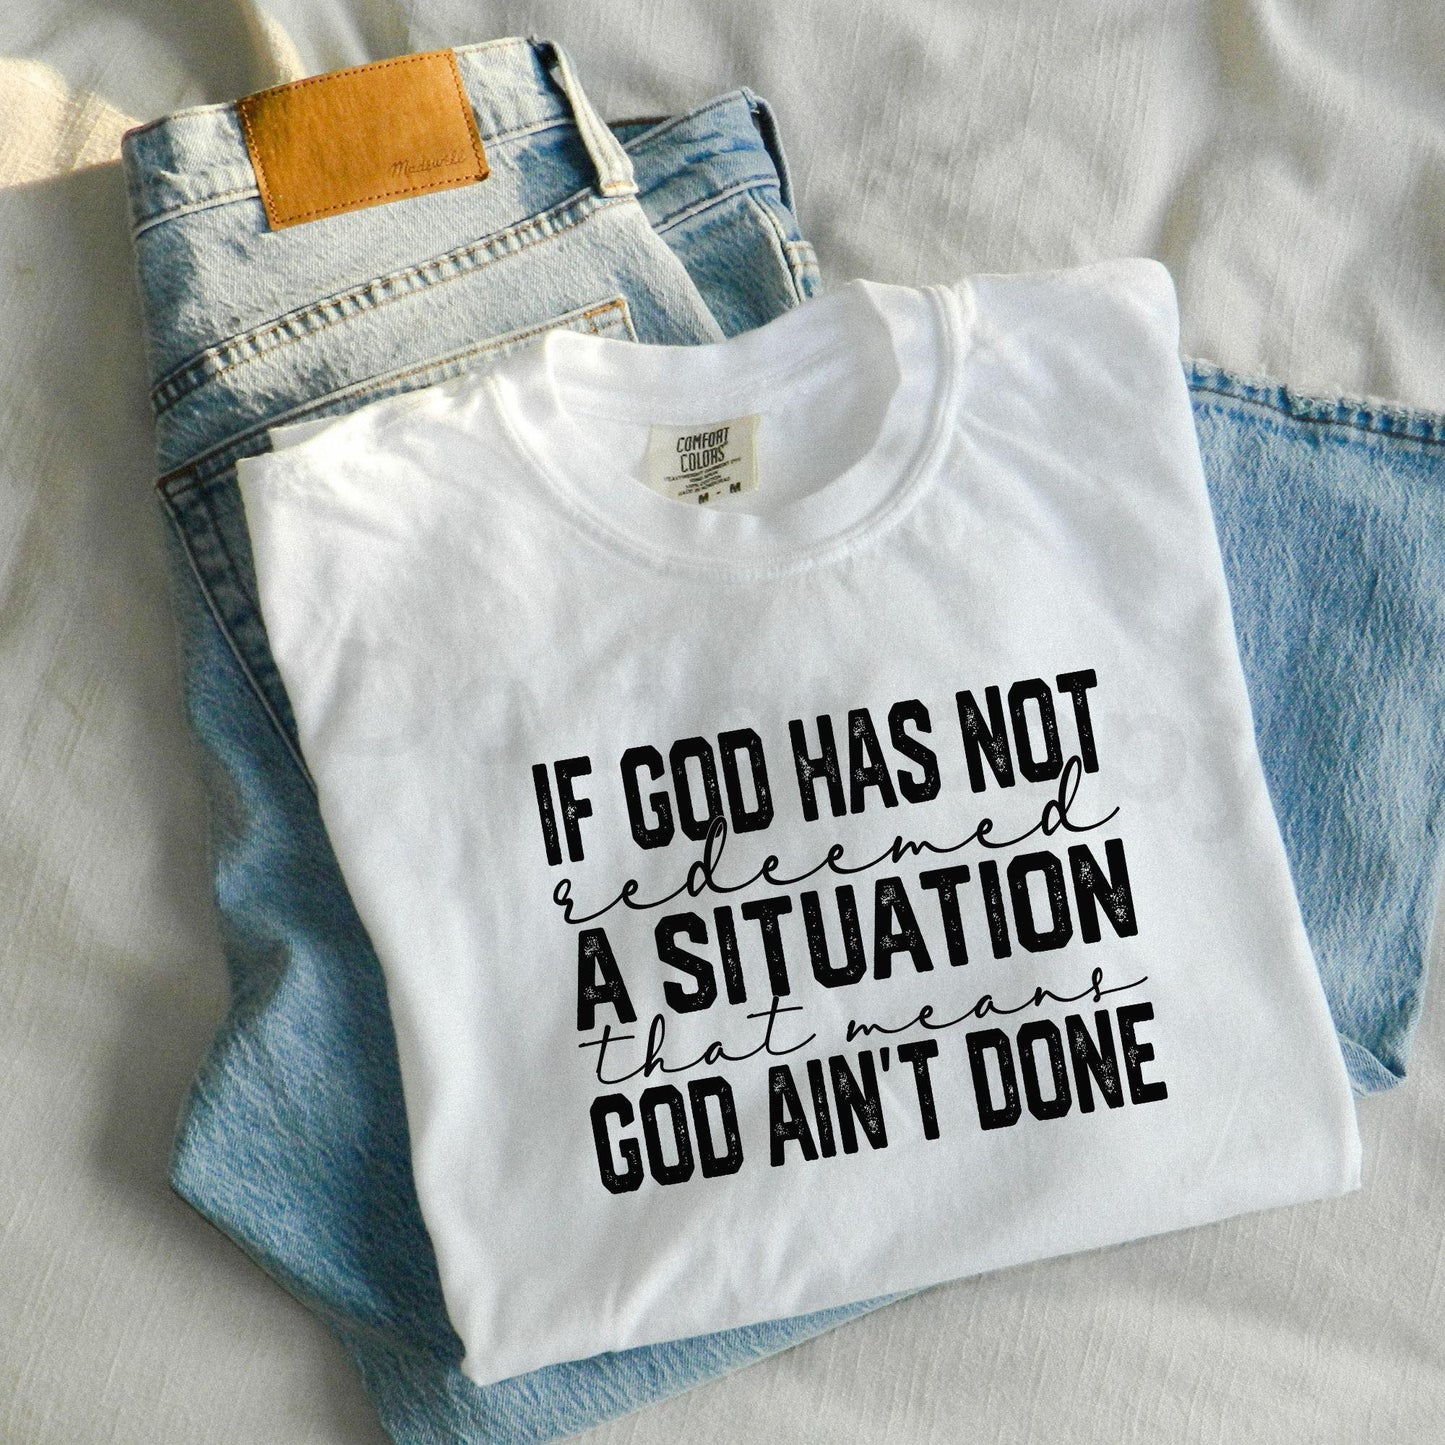 If God has not redeemed a situation God ain't done- dtf transfer